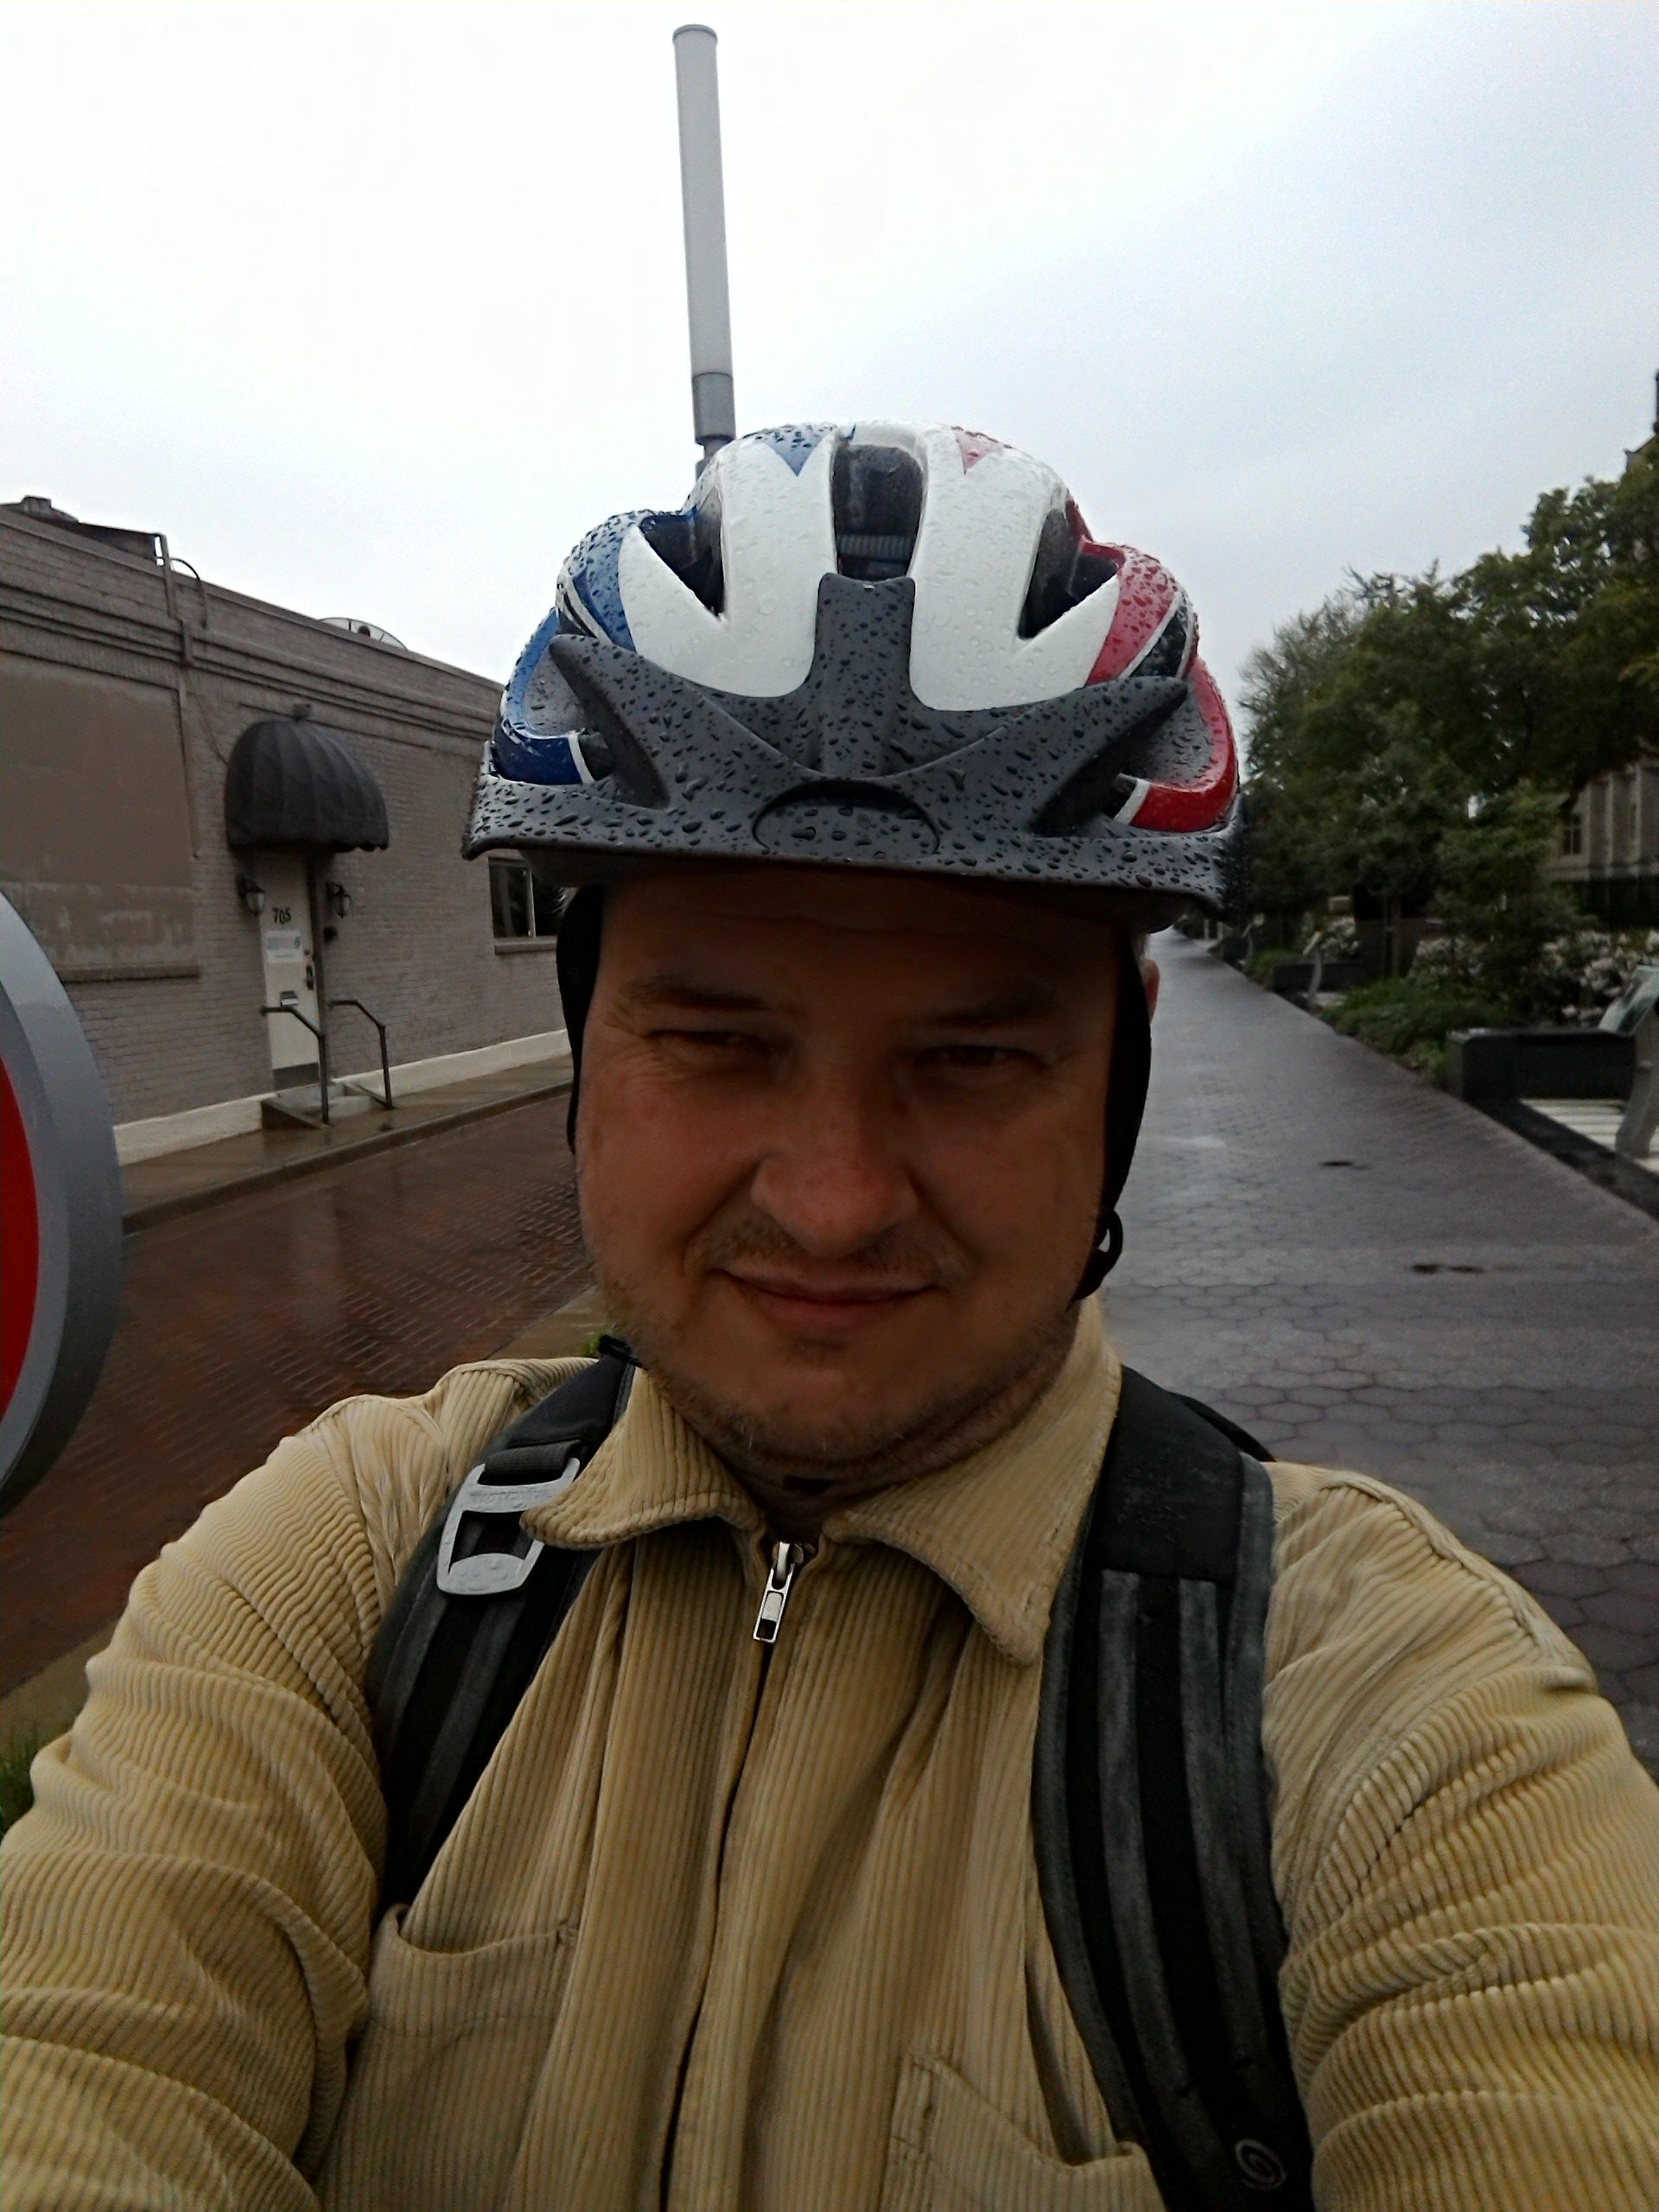 I'm wearing a green corduroy jacket, a backpack, and a rain-spattered bicycle helmet. In the background is a building, some trees, and the brick-paved trail.